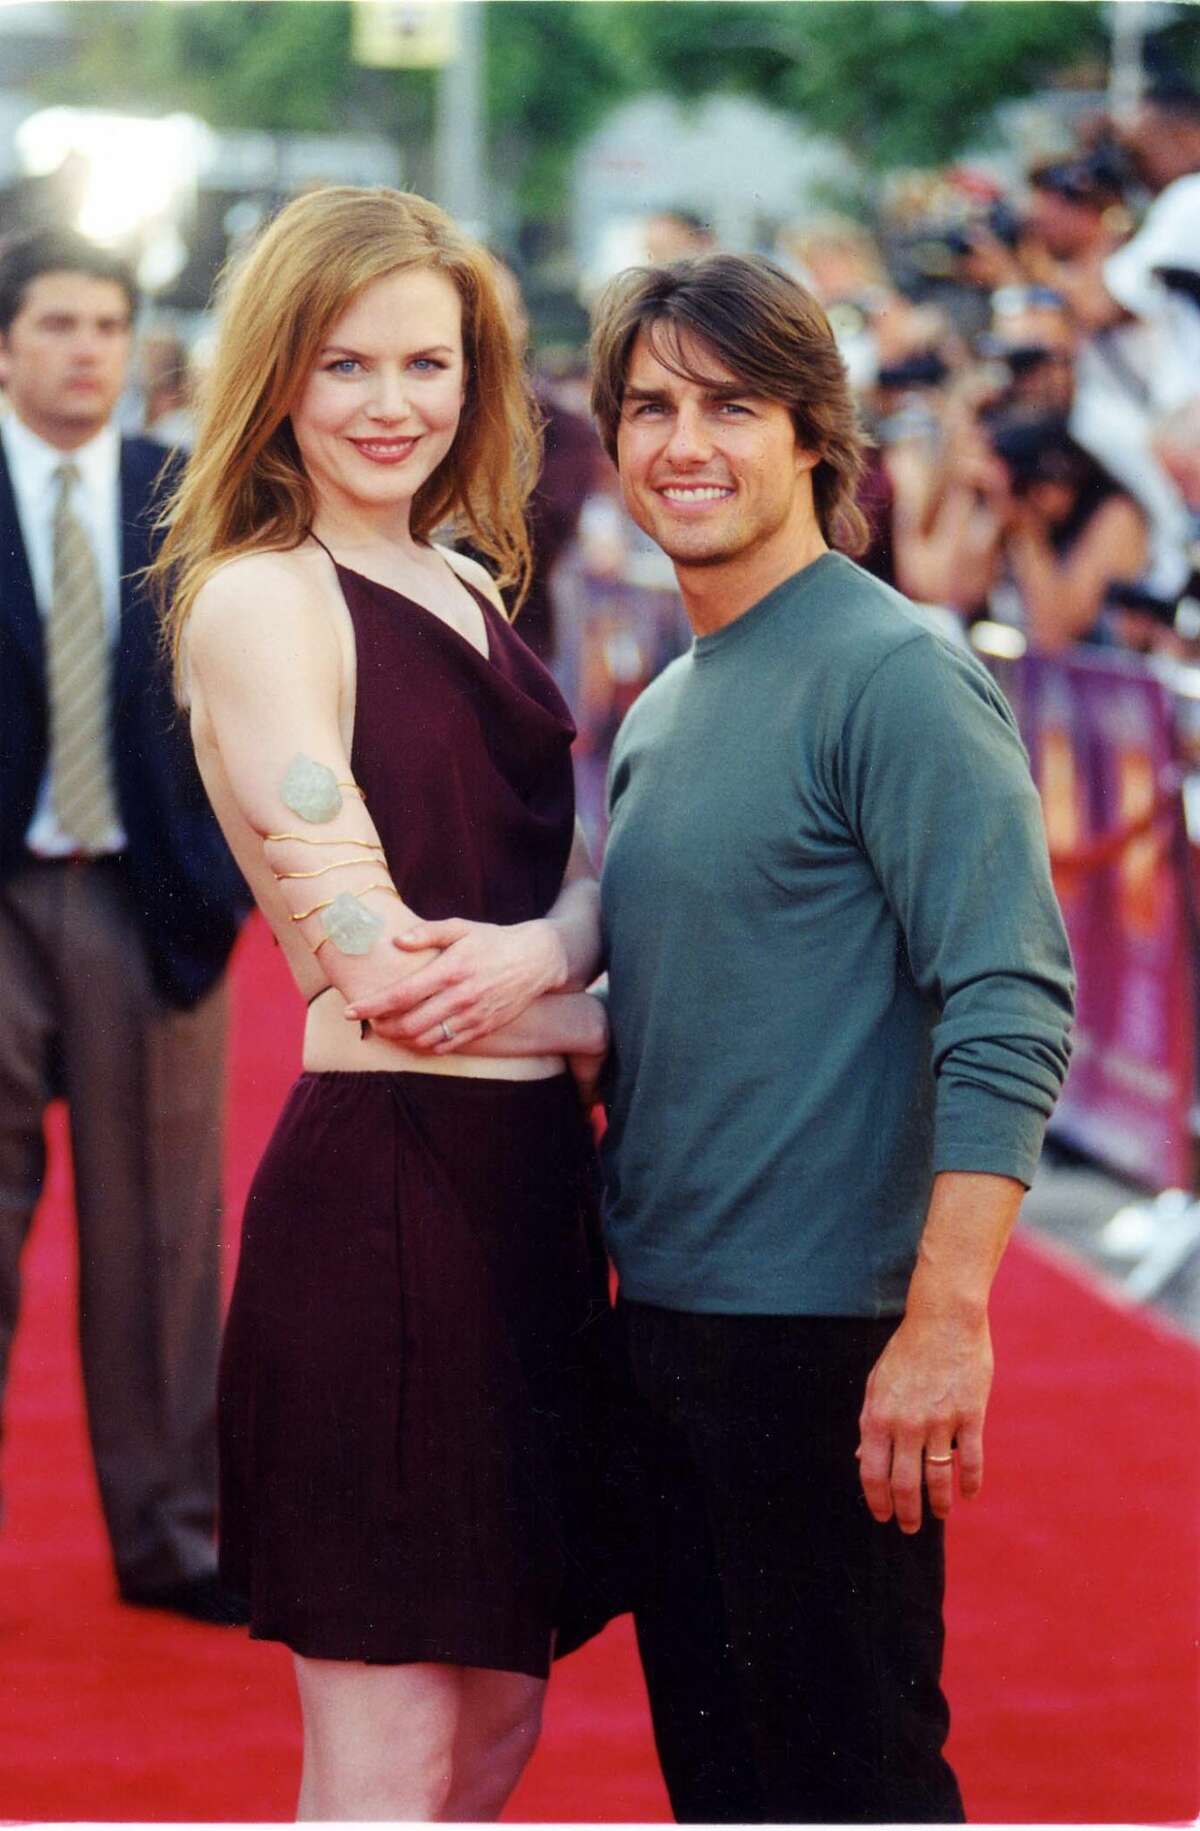 Entertainment Nicole Kidman & Tom Cruise star in "Eyes Wide Shut," a Stanley Kubrick movie about a sex cult. They would divorce just two years later. (Photo by Jeff Kravitz/FilmMagic)